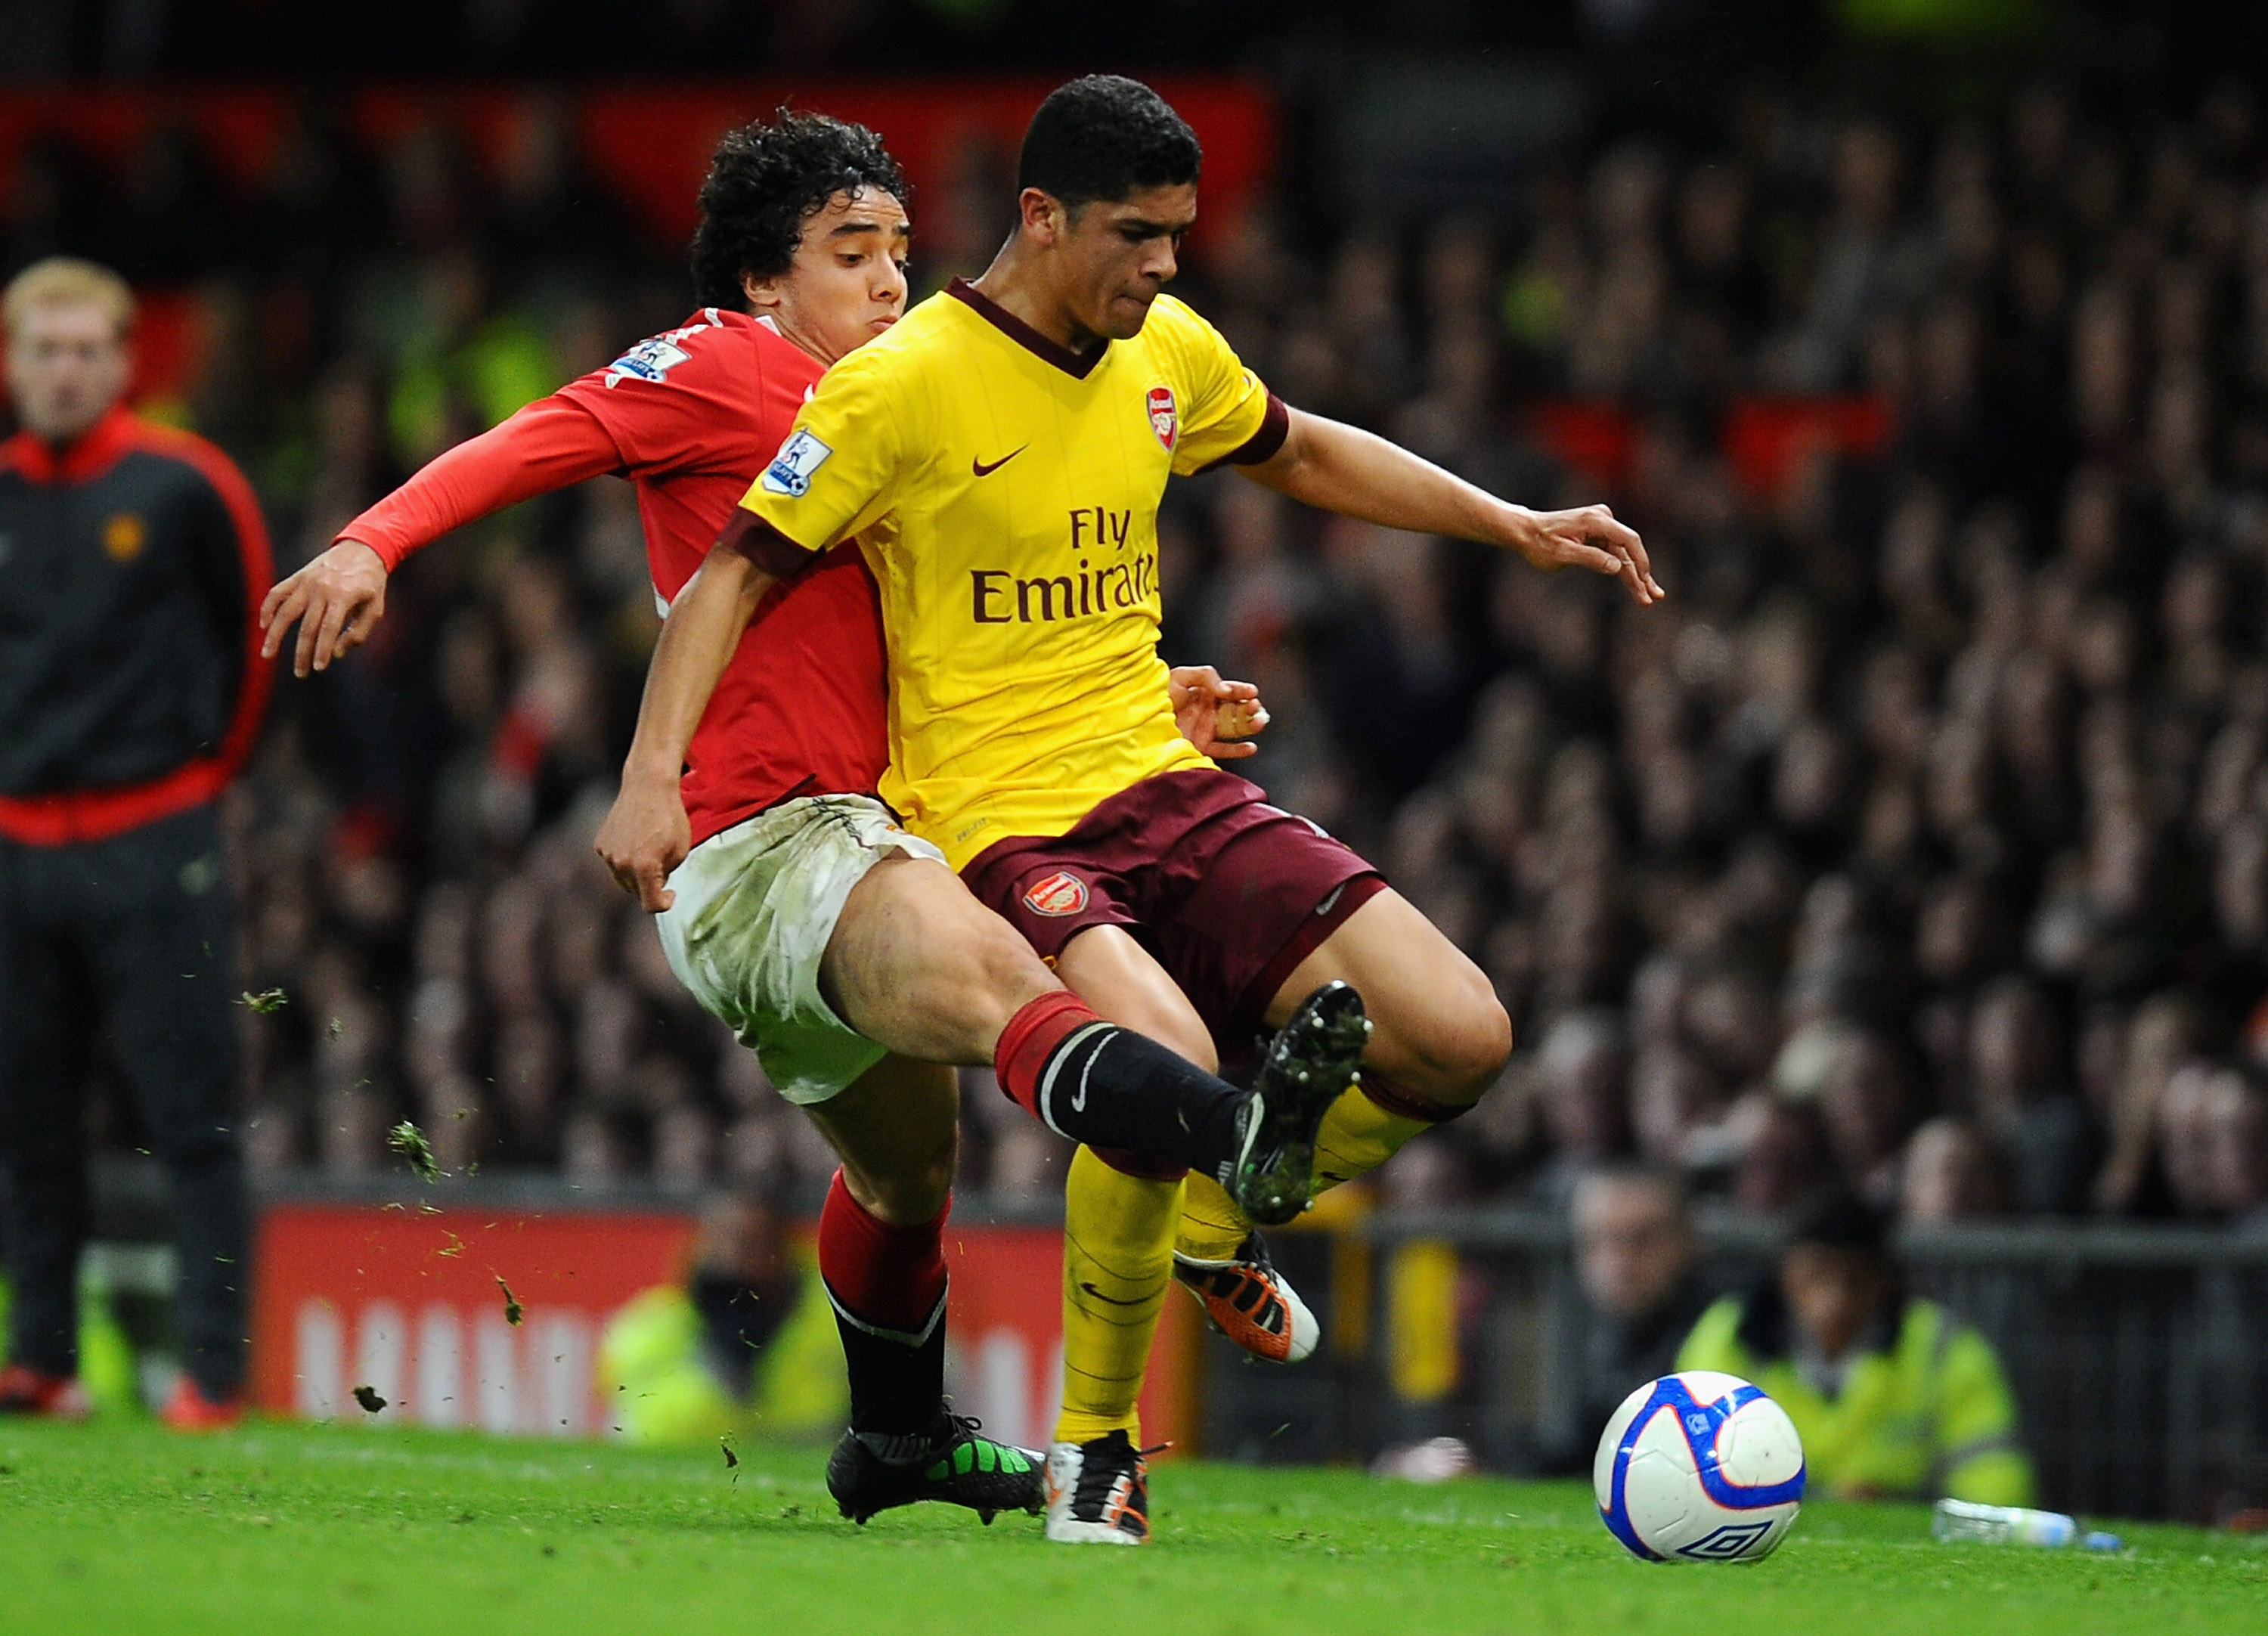 MANCHESTER, ENGLAND - MARCH 12: Rafael Da Silva of Manchester United and Denilson of Arsenal battle for the ball during the FA Cup sponsored by E.On Sixth Round match between Manchester United and Arsenal at Old Trafford on March 12, 2011 in Manchester, E